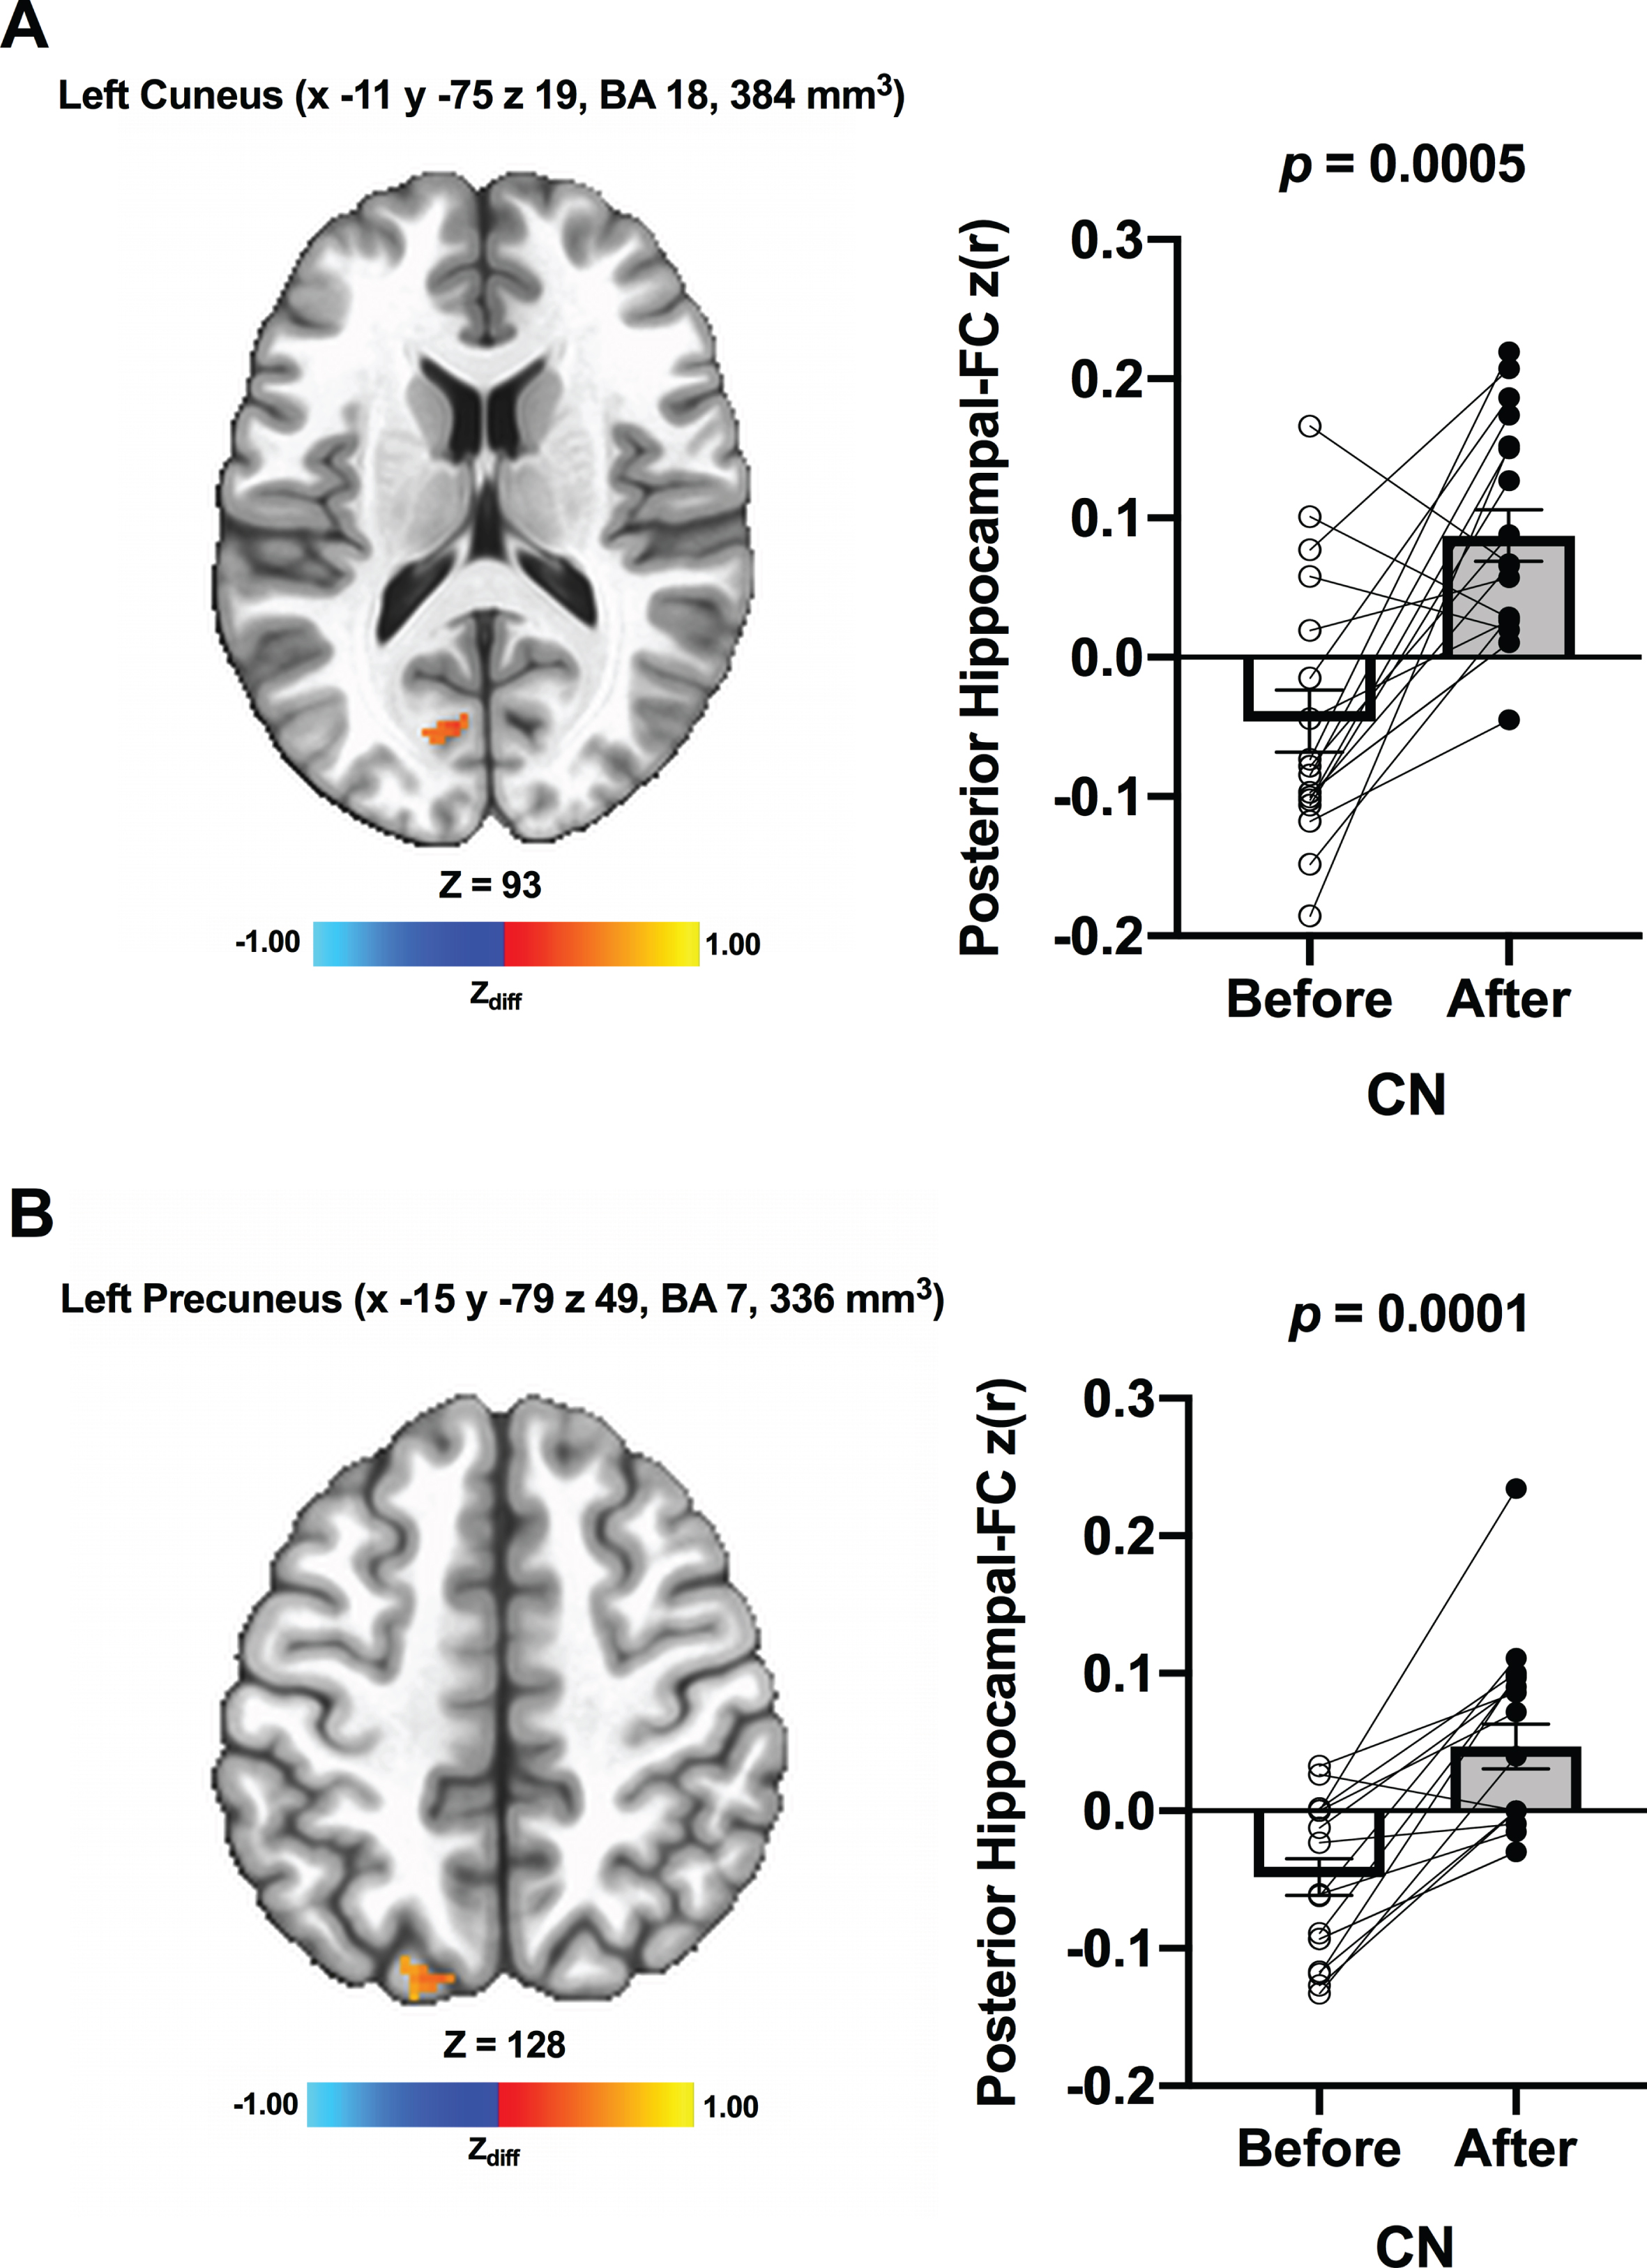 Increased functional connectivity between posterior hippocampal seed and (A) left cuneus and (B) left precuneus, respectively, were found from before to after ET in CN individuals. Adjacent bar graphs indicate the connectivity between each hippocampal seed and right posterior cingulate (±SEM) for before and after ET. p-values above bar graphs indicate statistical difference from before to after ET.